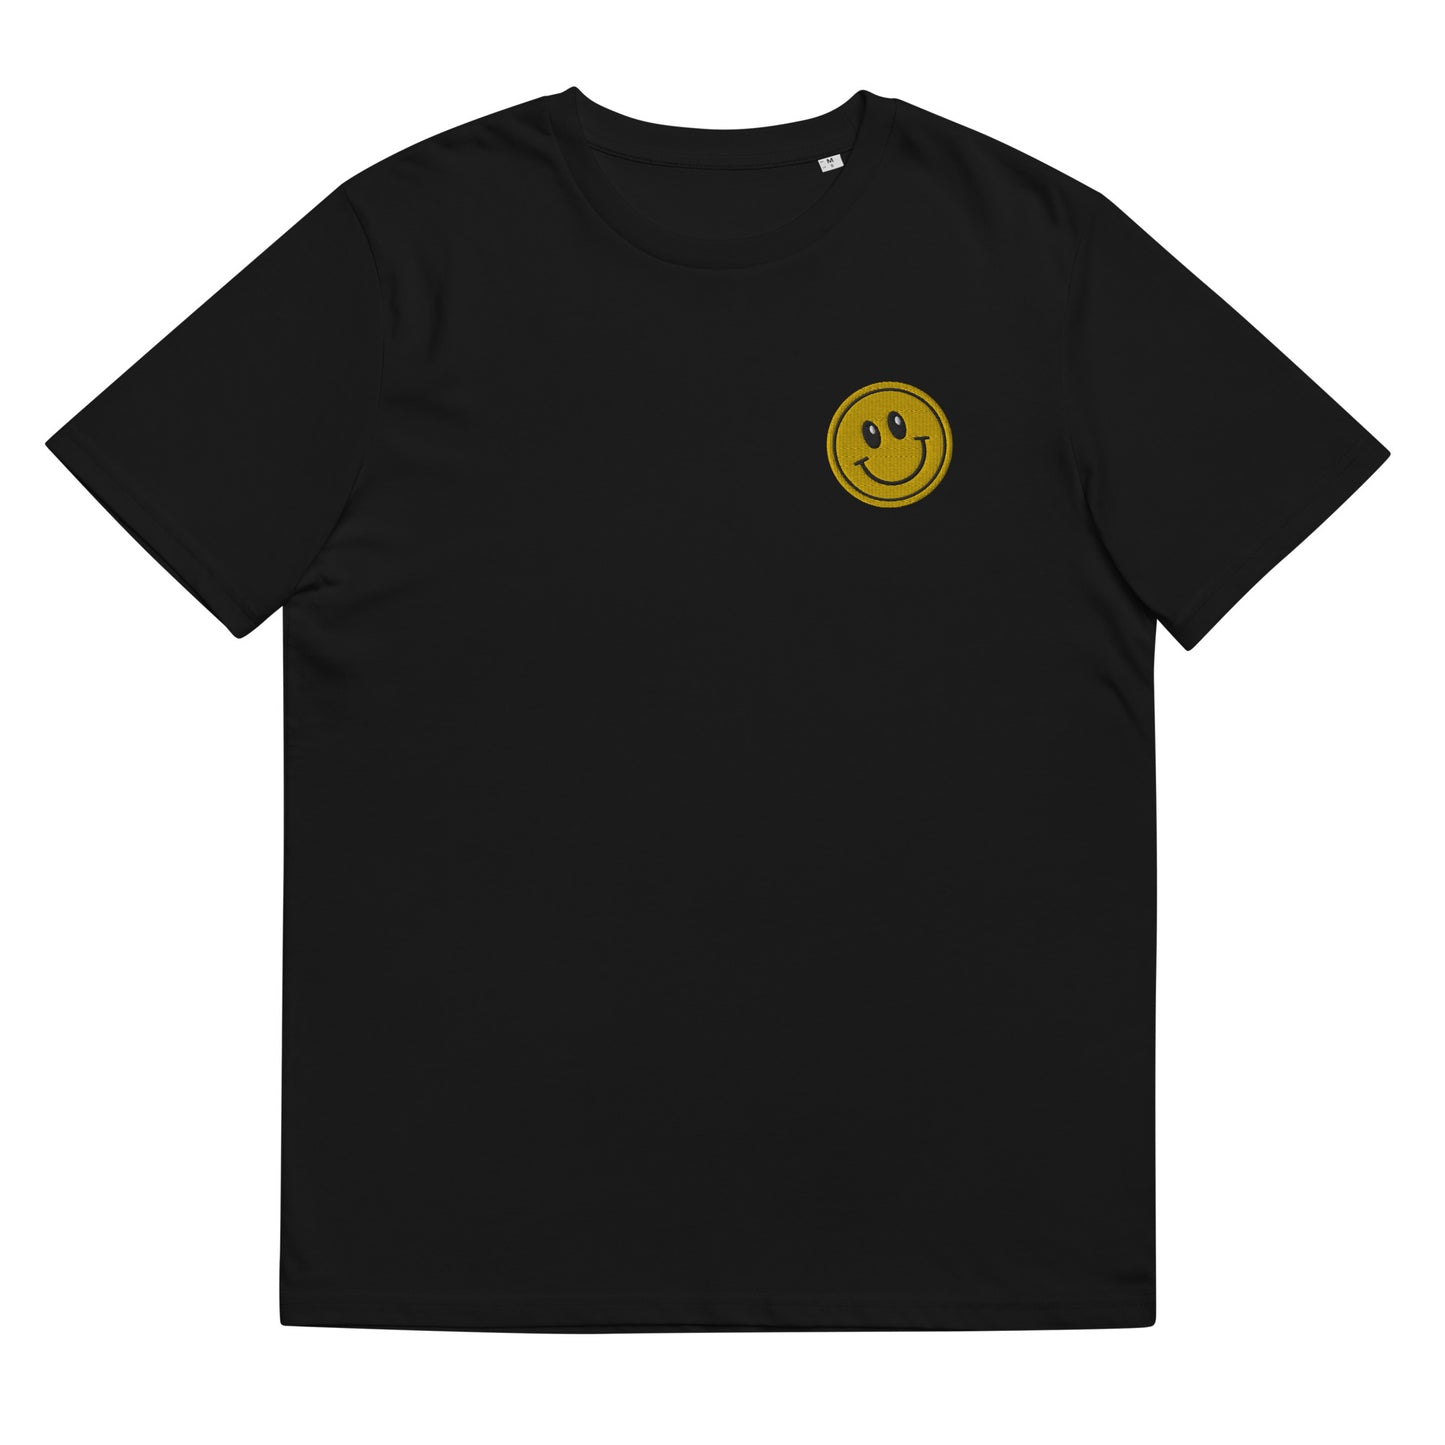 Classic Smiley Embroidered Unisex organic cotton t-shirt